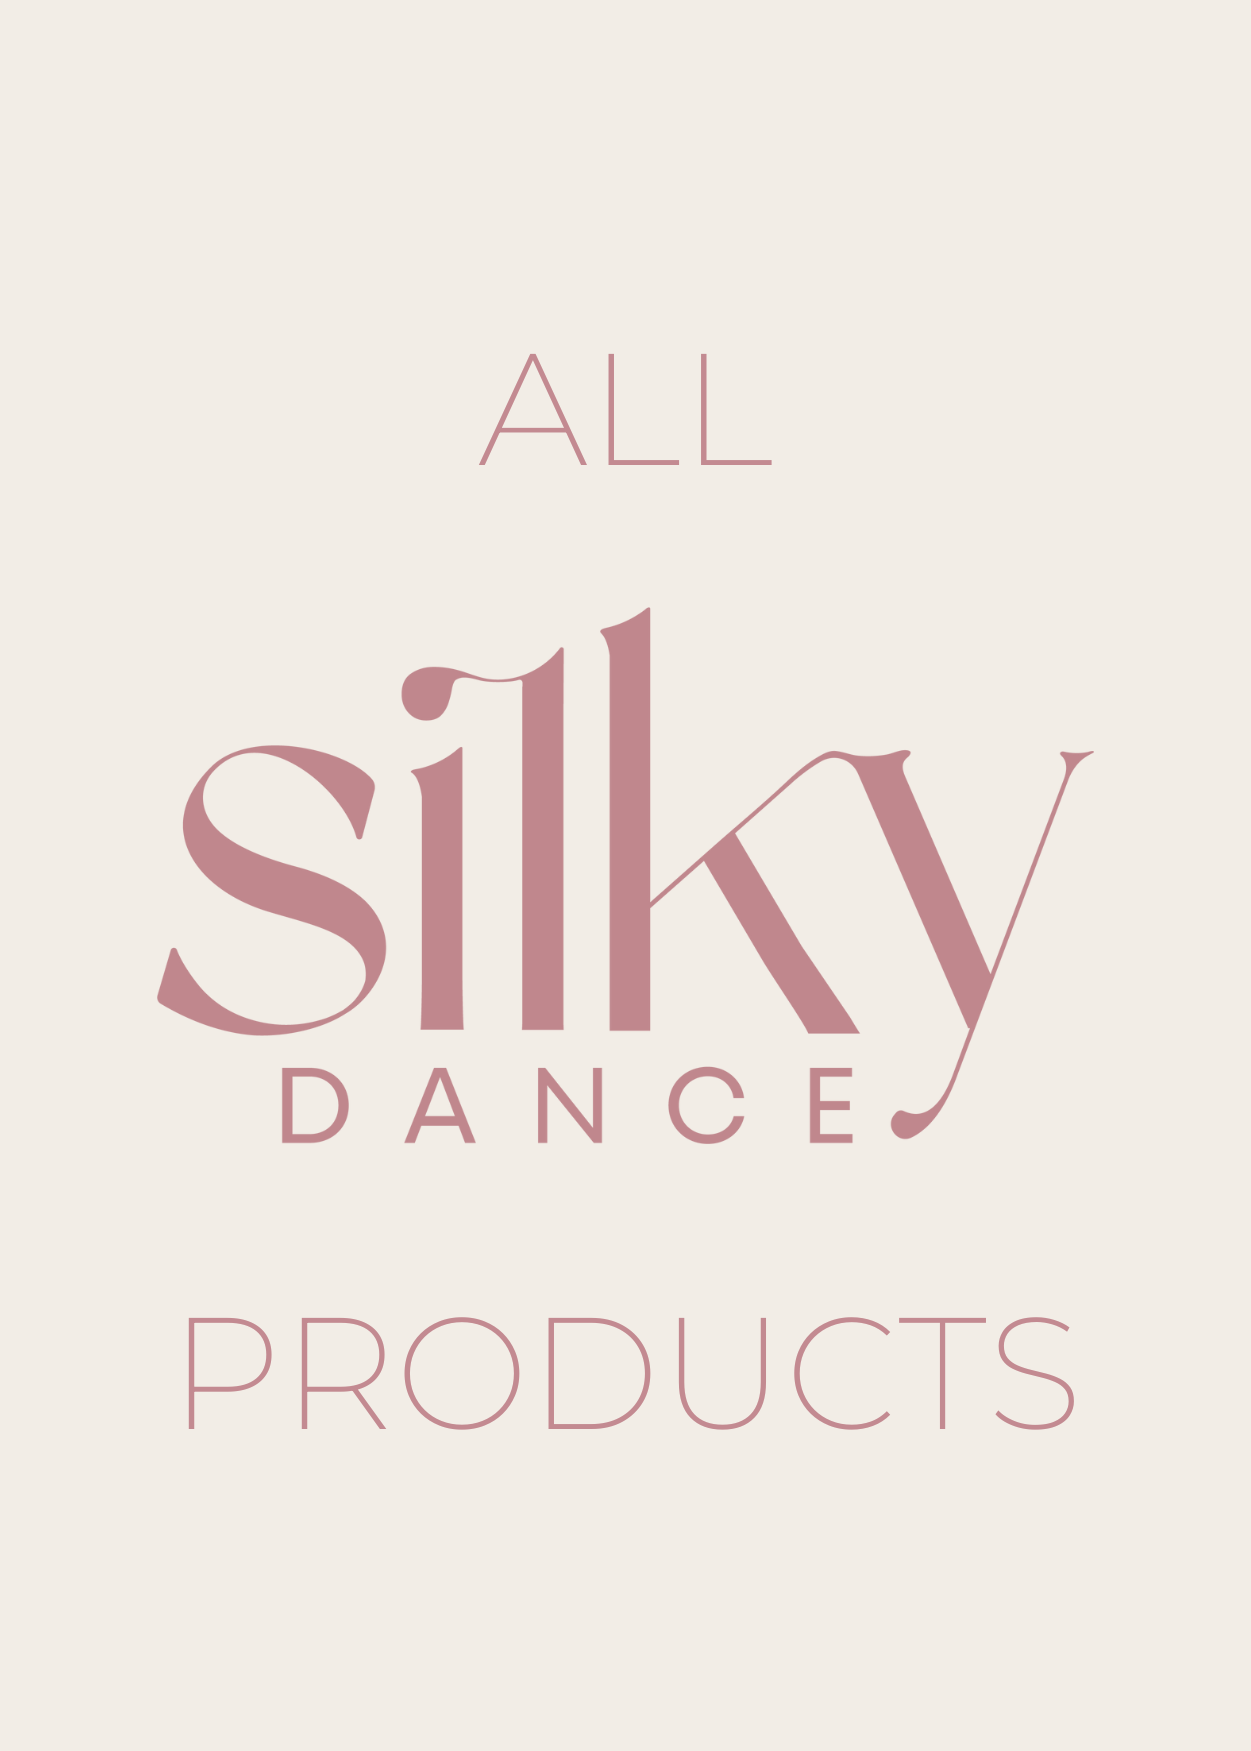 All Silky Dance Products